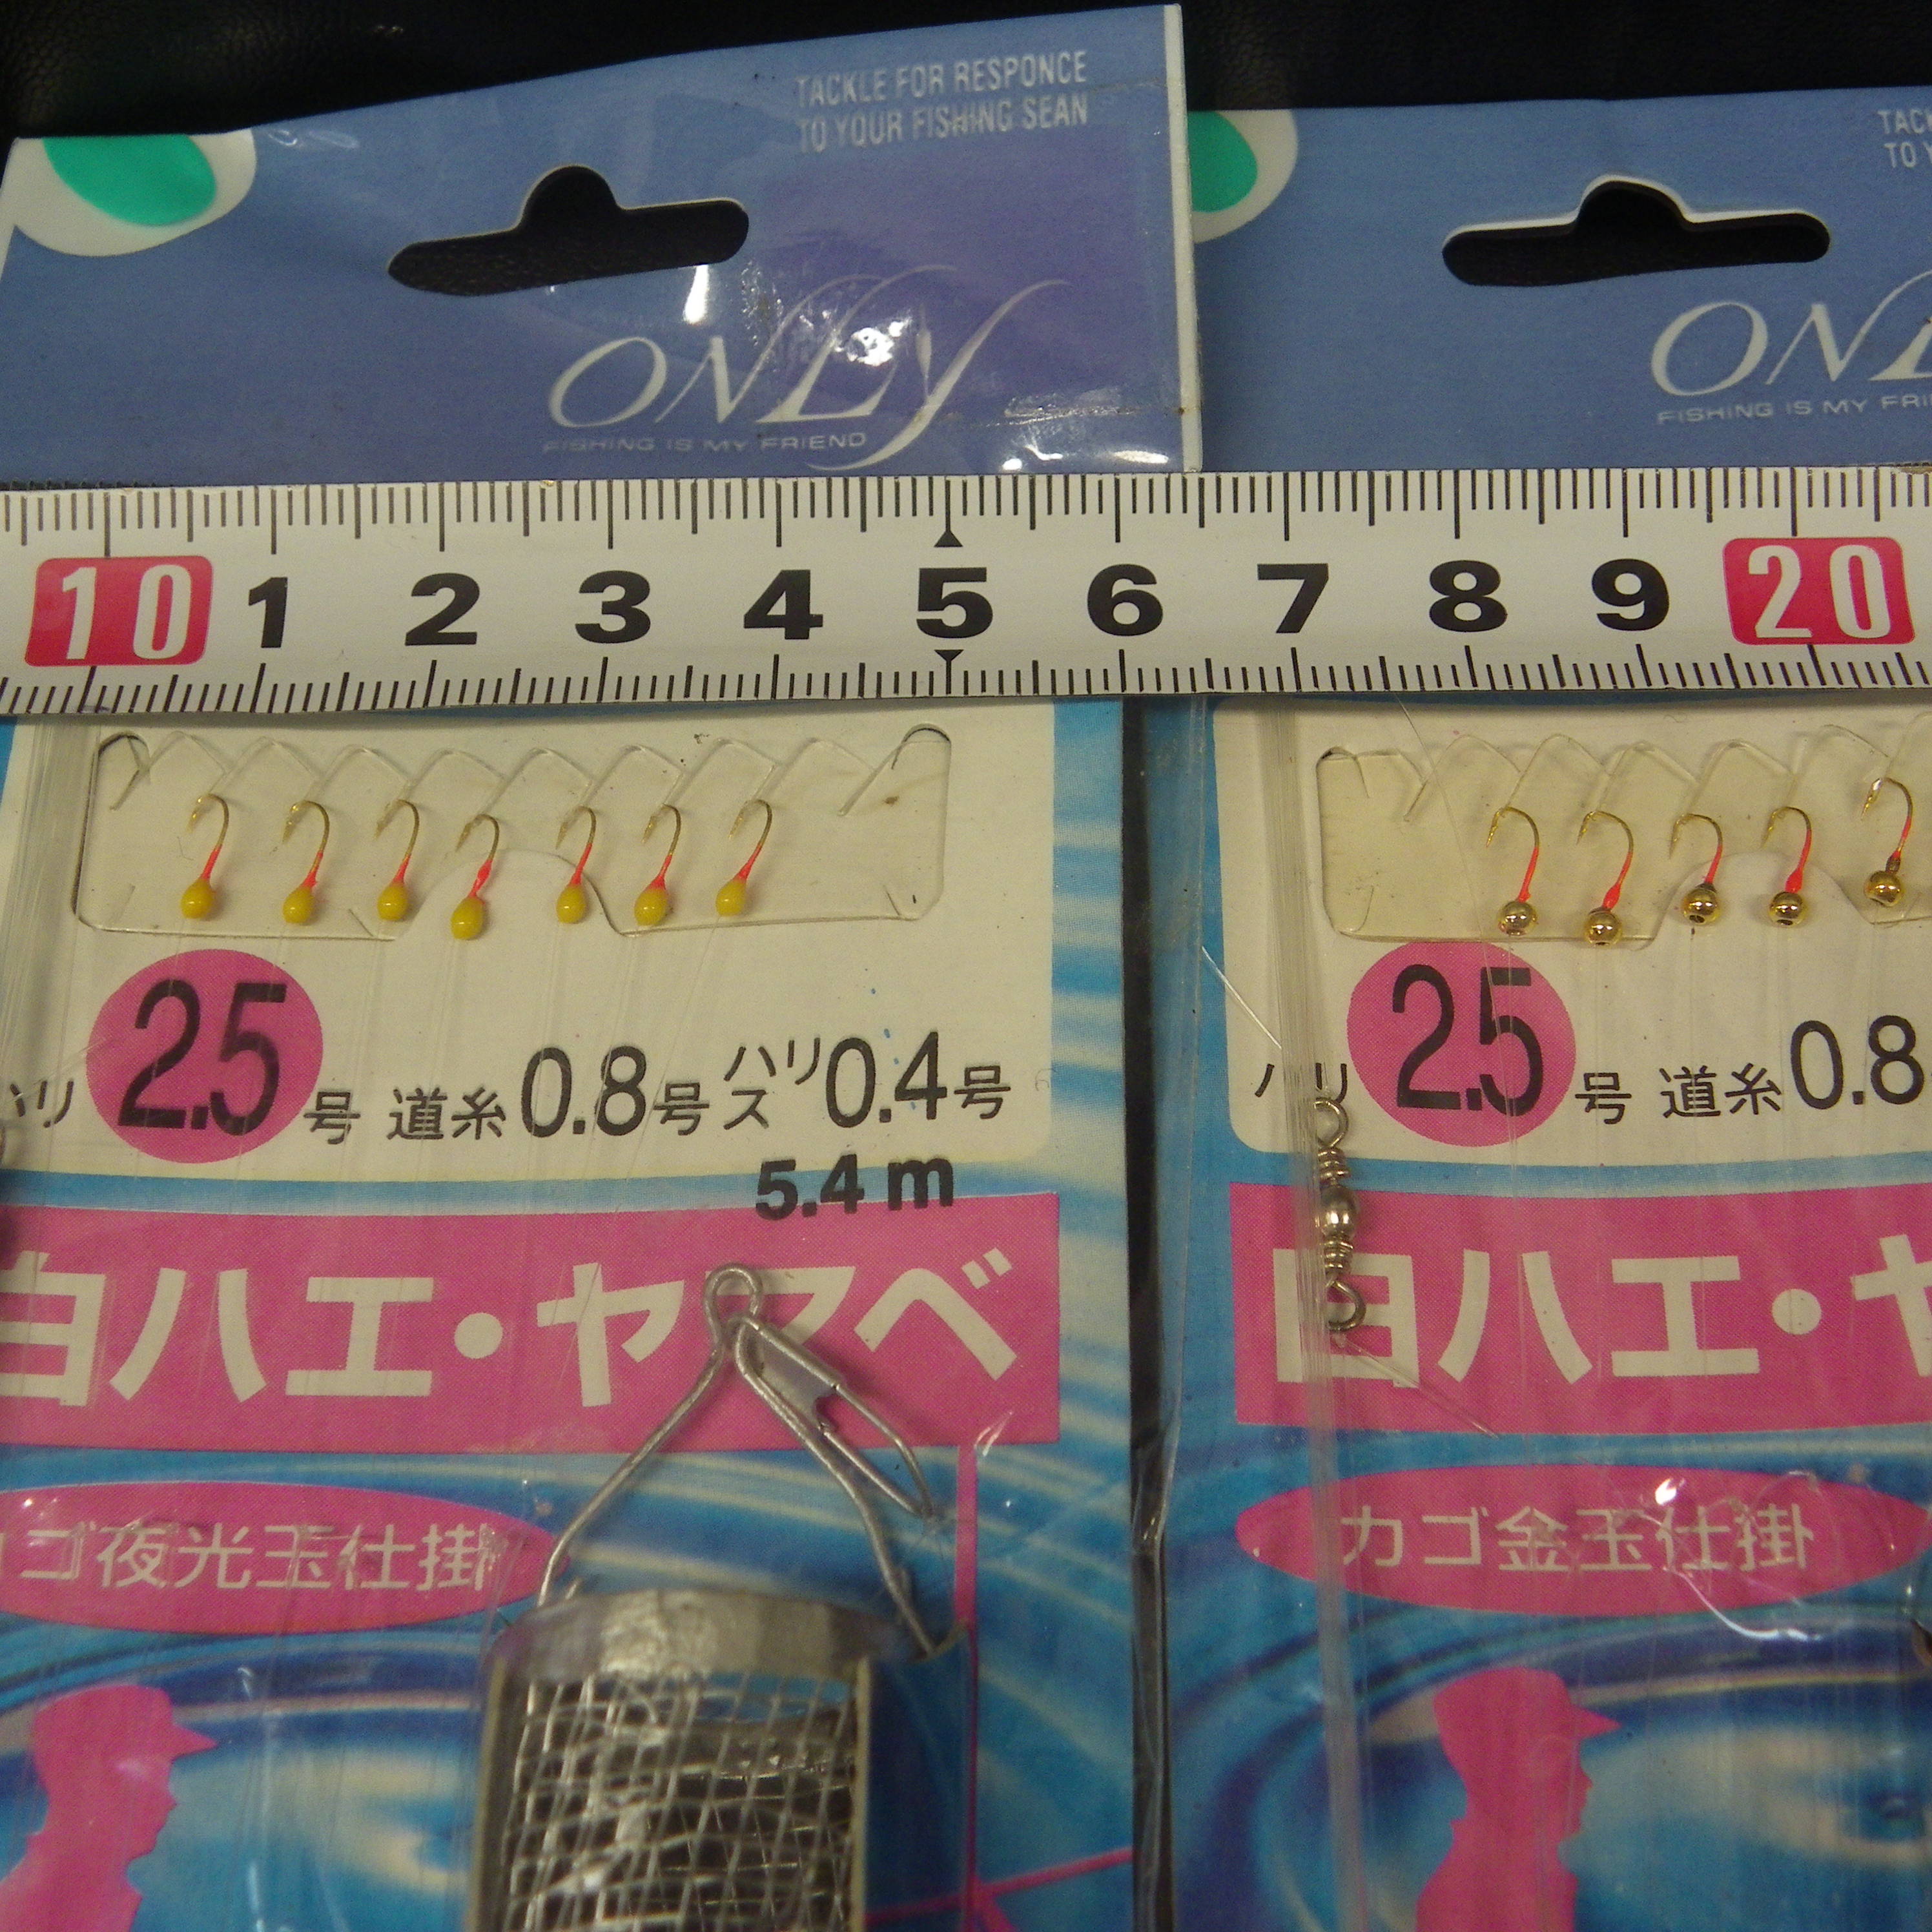 Owner white fly yamabe basket fishing device white light gold device 2.5 number road thread 5.4m etc. total 5 point set * dirt have * stock goods (7i0703) * click post 